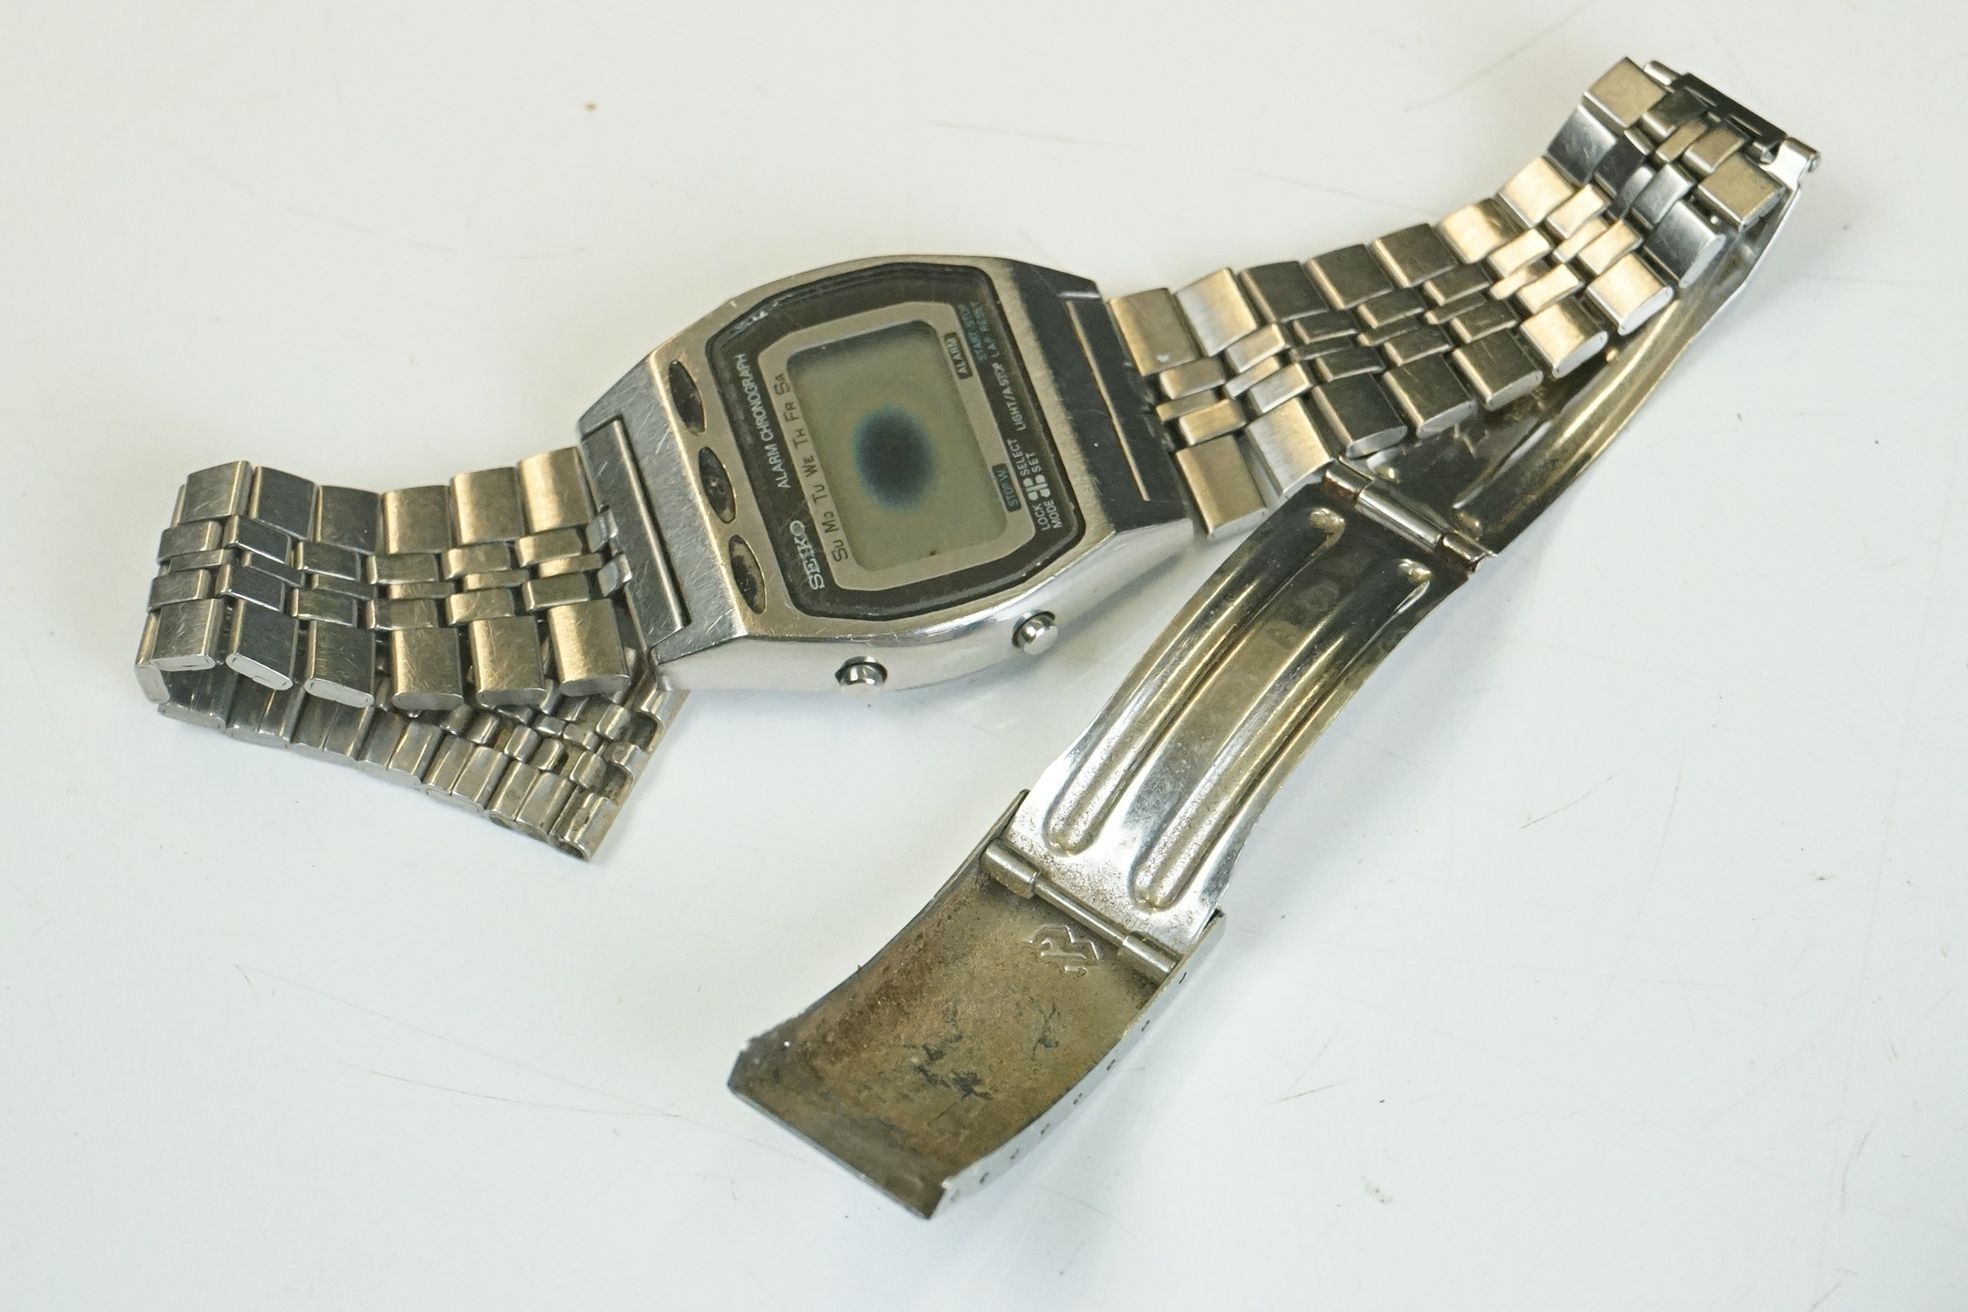 Collection of LCD Watches including Seiko, Casio, Lambda, etc - Image 11 of 14